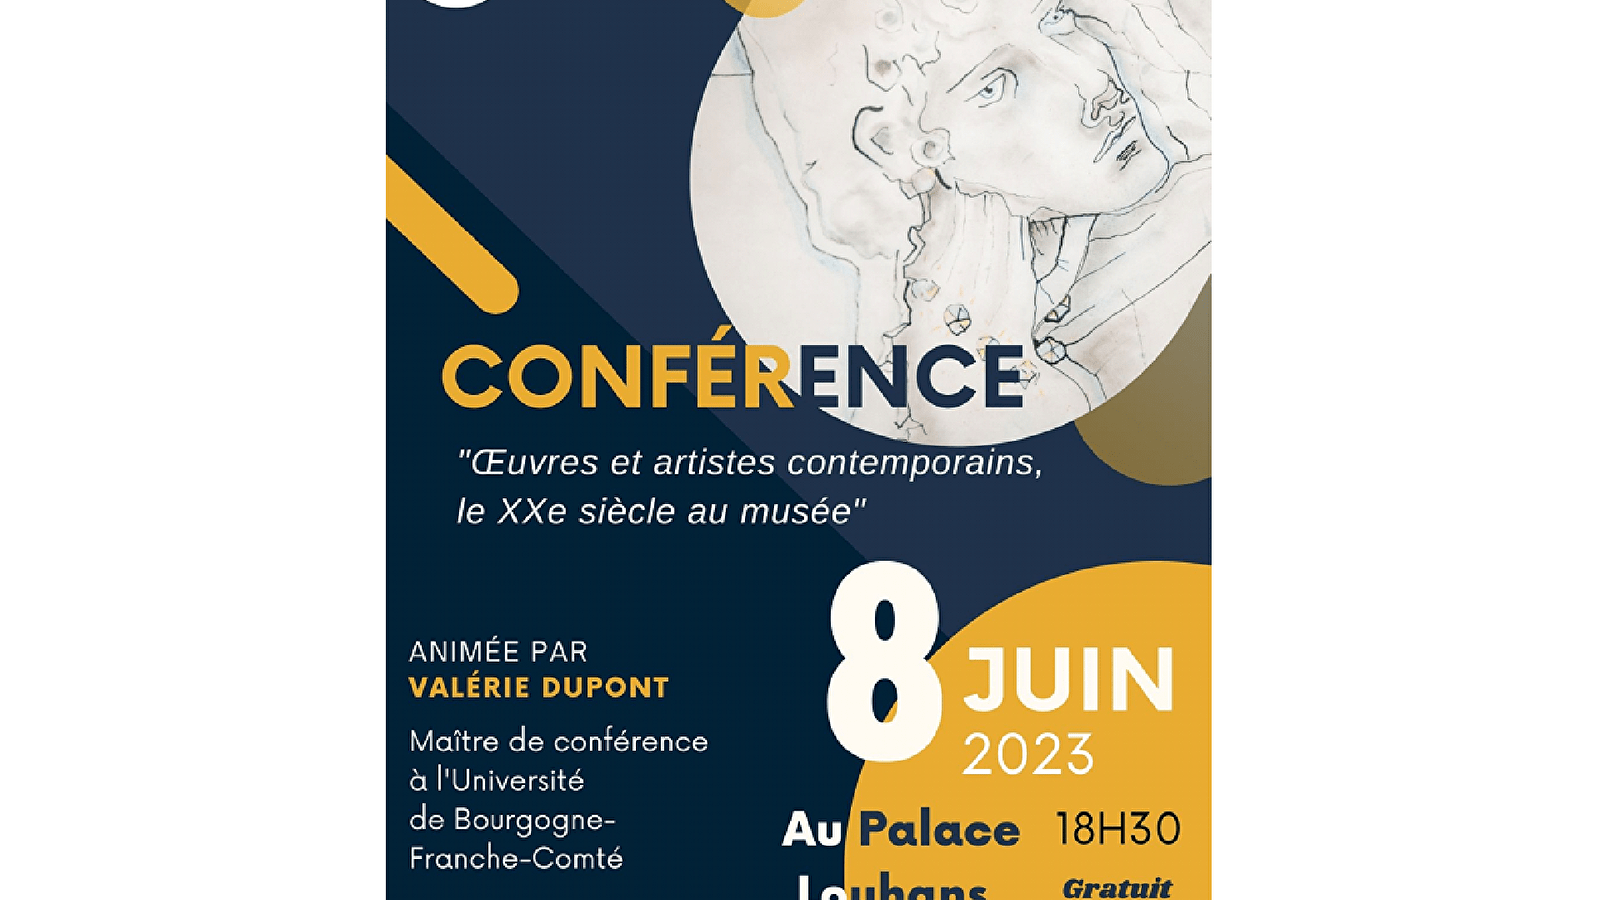 Conference 'Contemporary works and artists, the 20th century in the museum' by Valérie Dupont, lecturer at the University of Bourgogne-Franche-Comté.